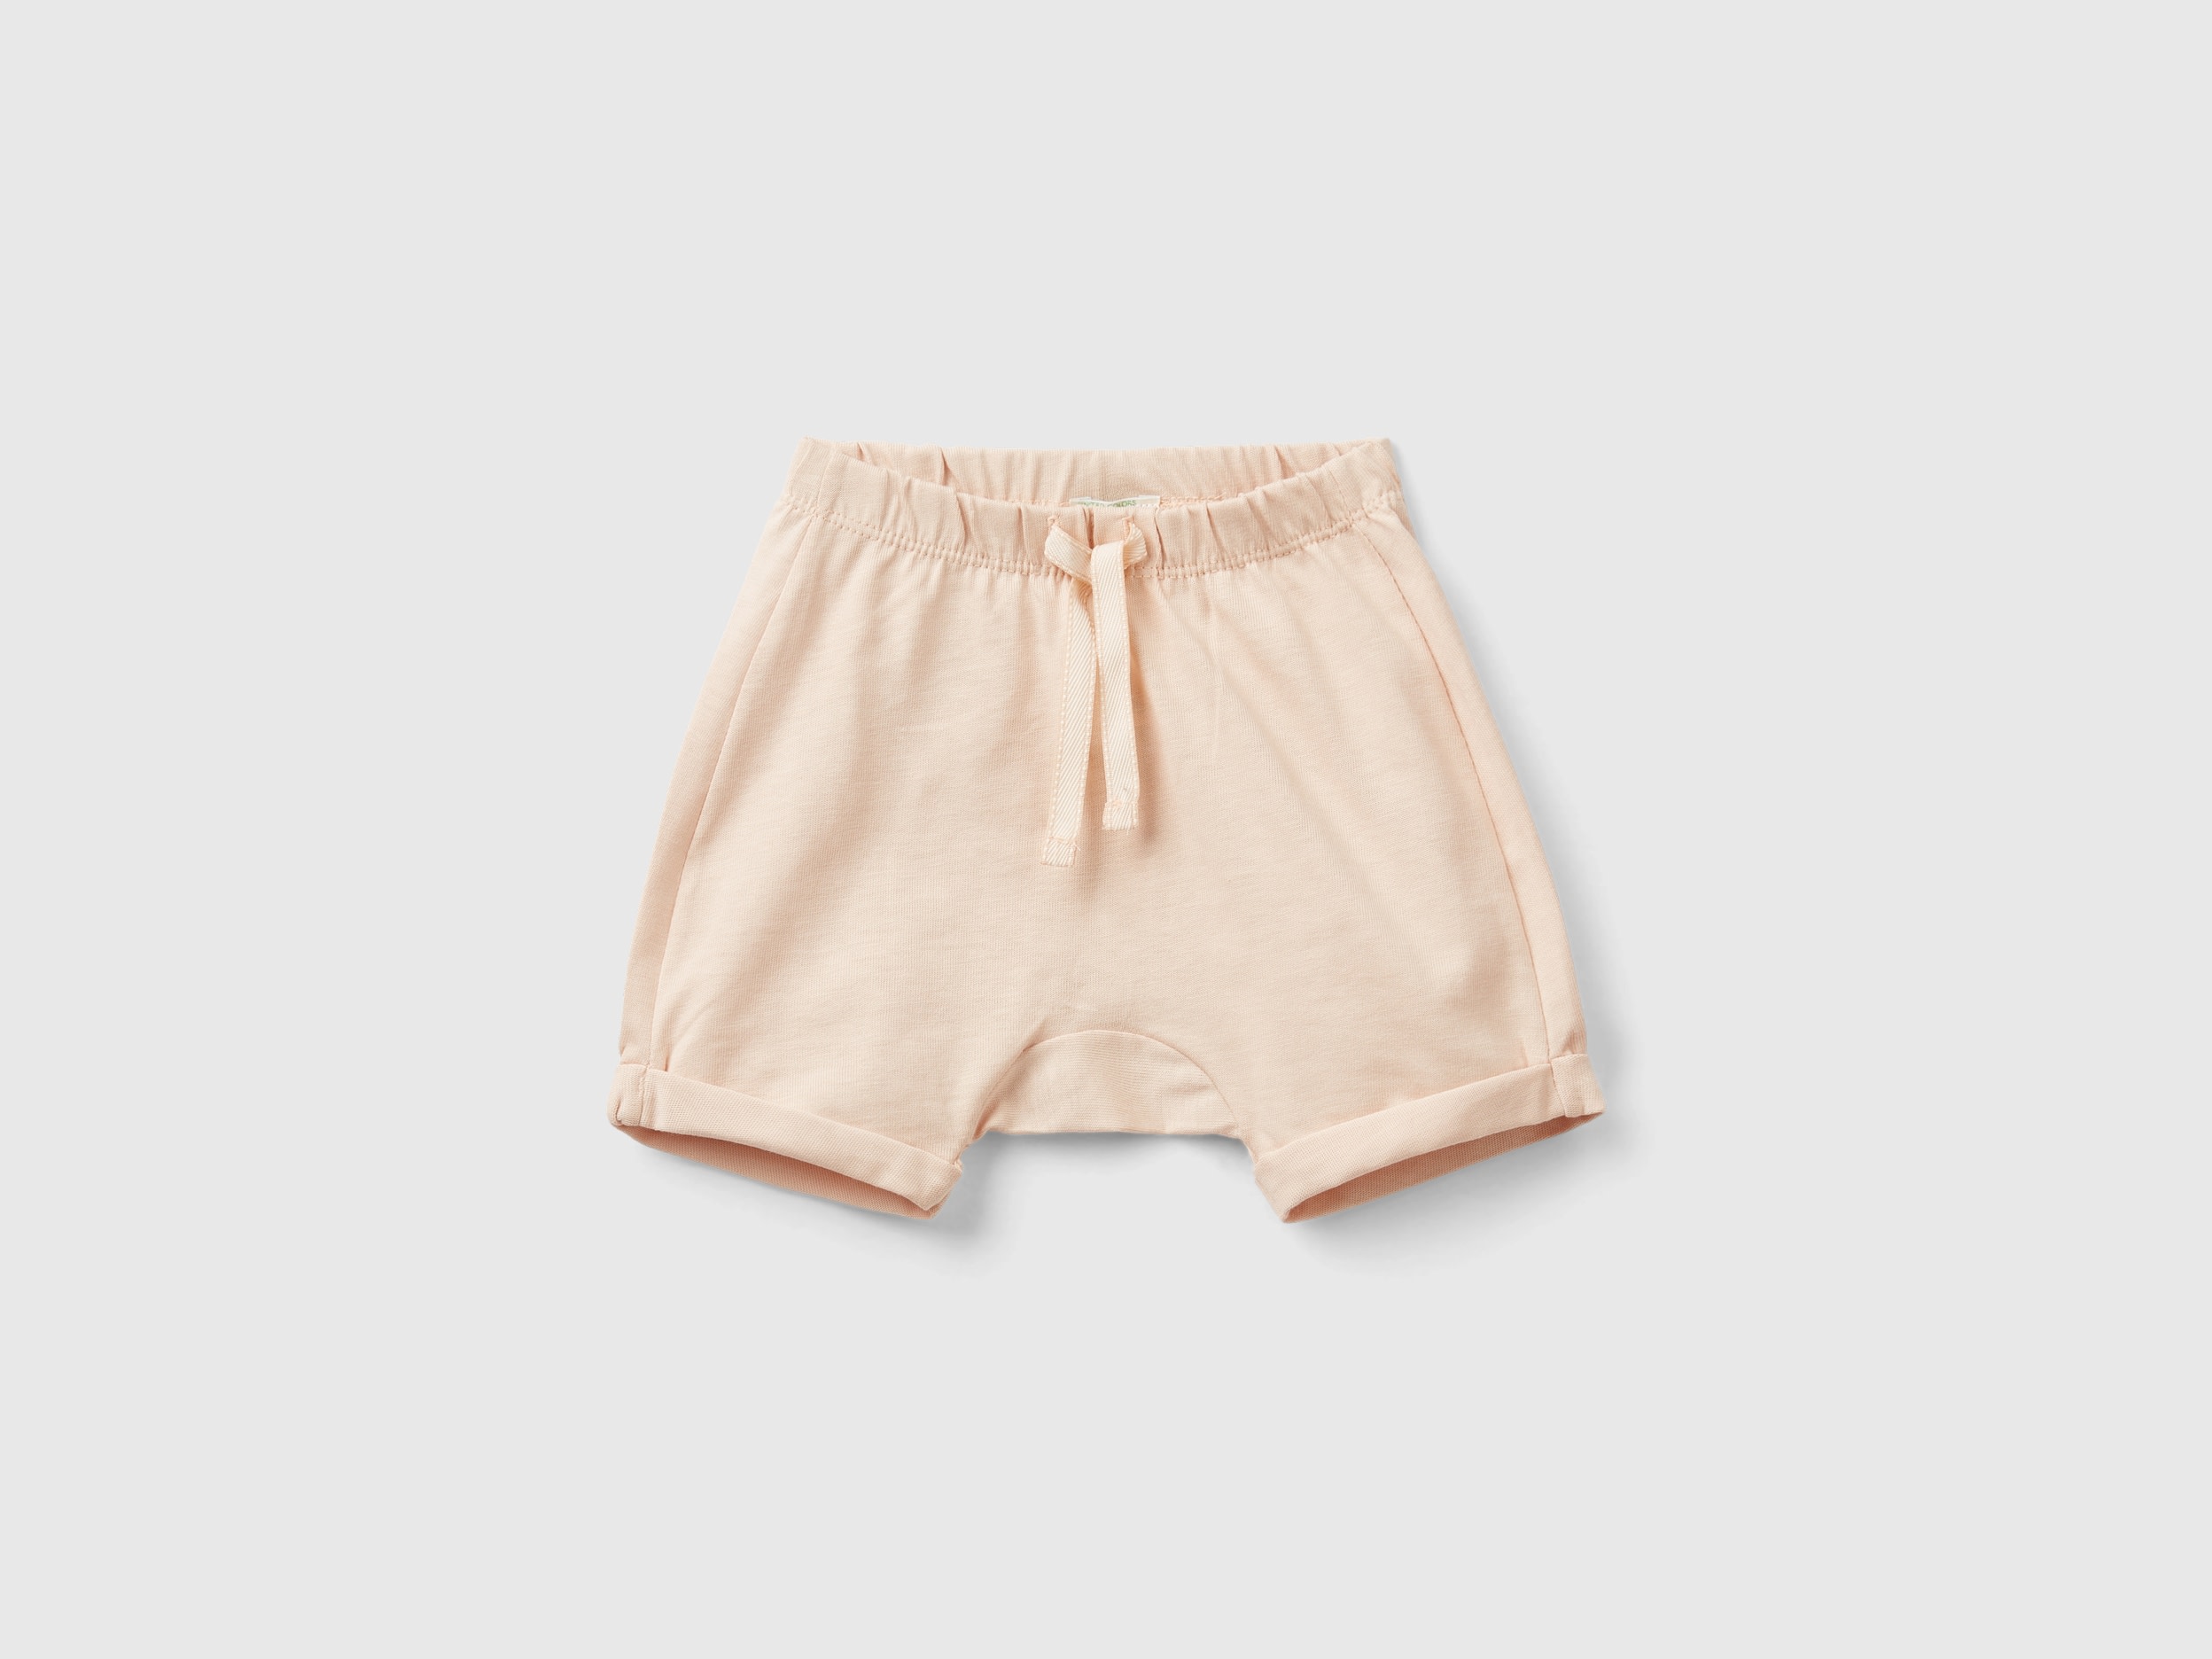 Image of Benetton, Shorts With Patch On The Back, size 82, Peach, Kids